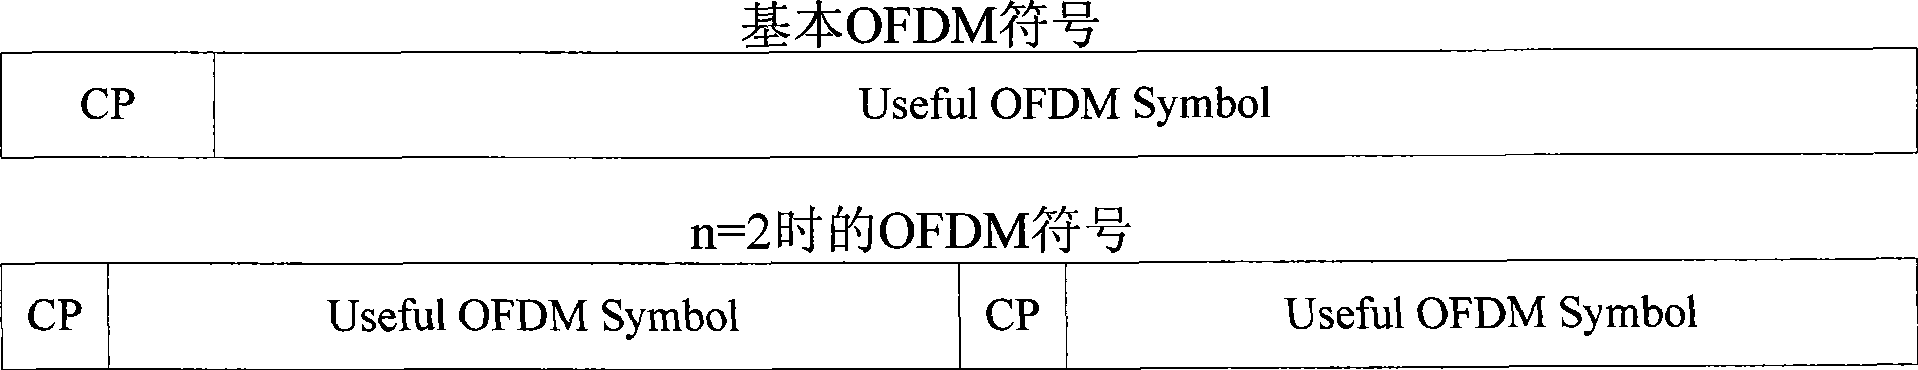 Method for collocating OFDM system